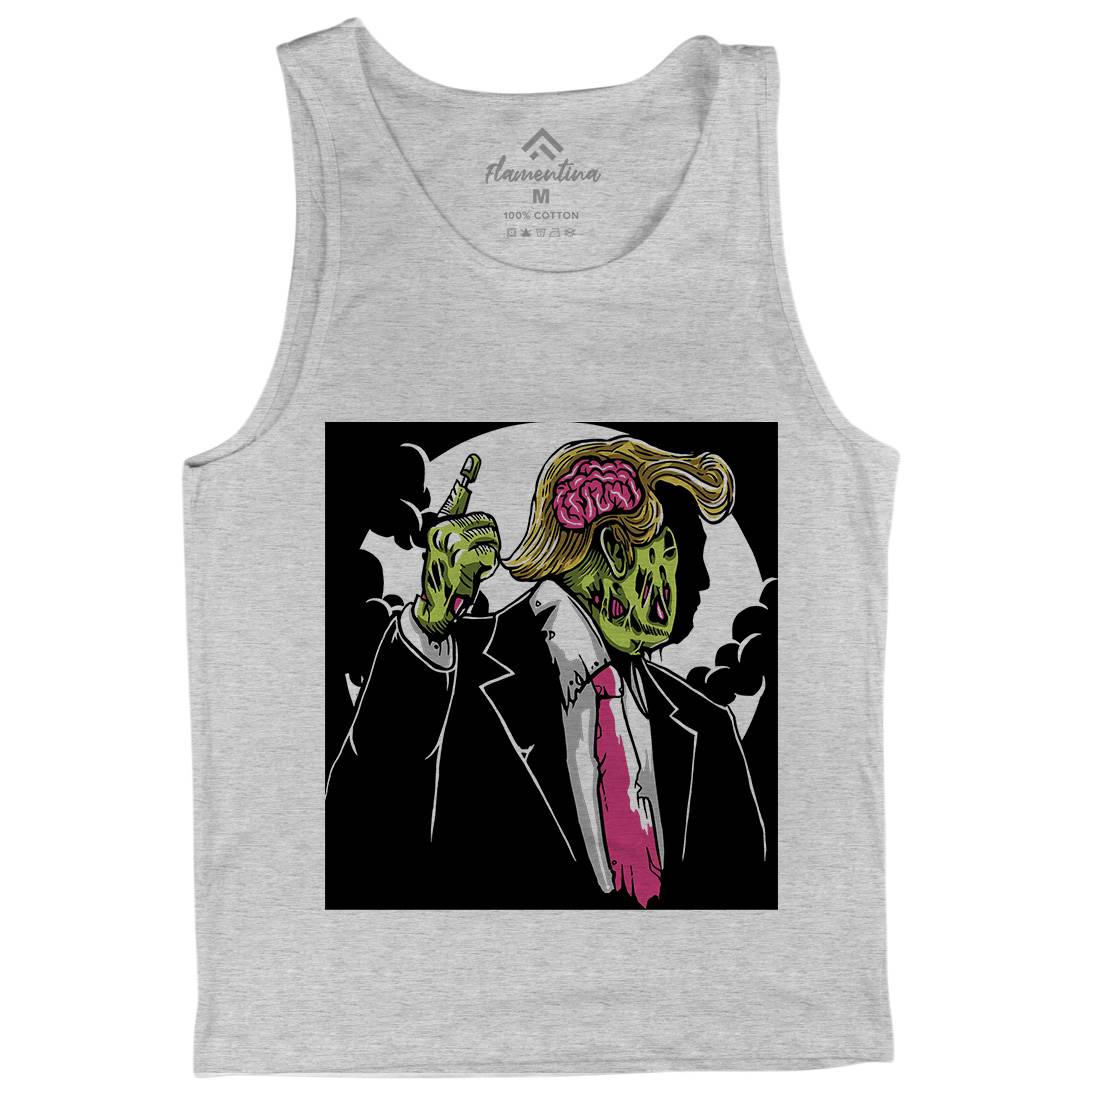 Make Zombie Great Again Mens Tank Top Vest Horror A554